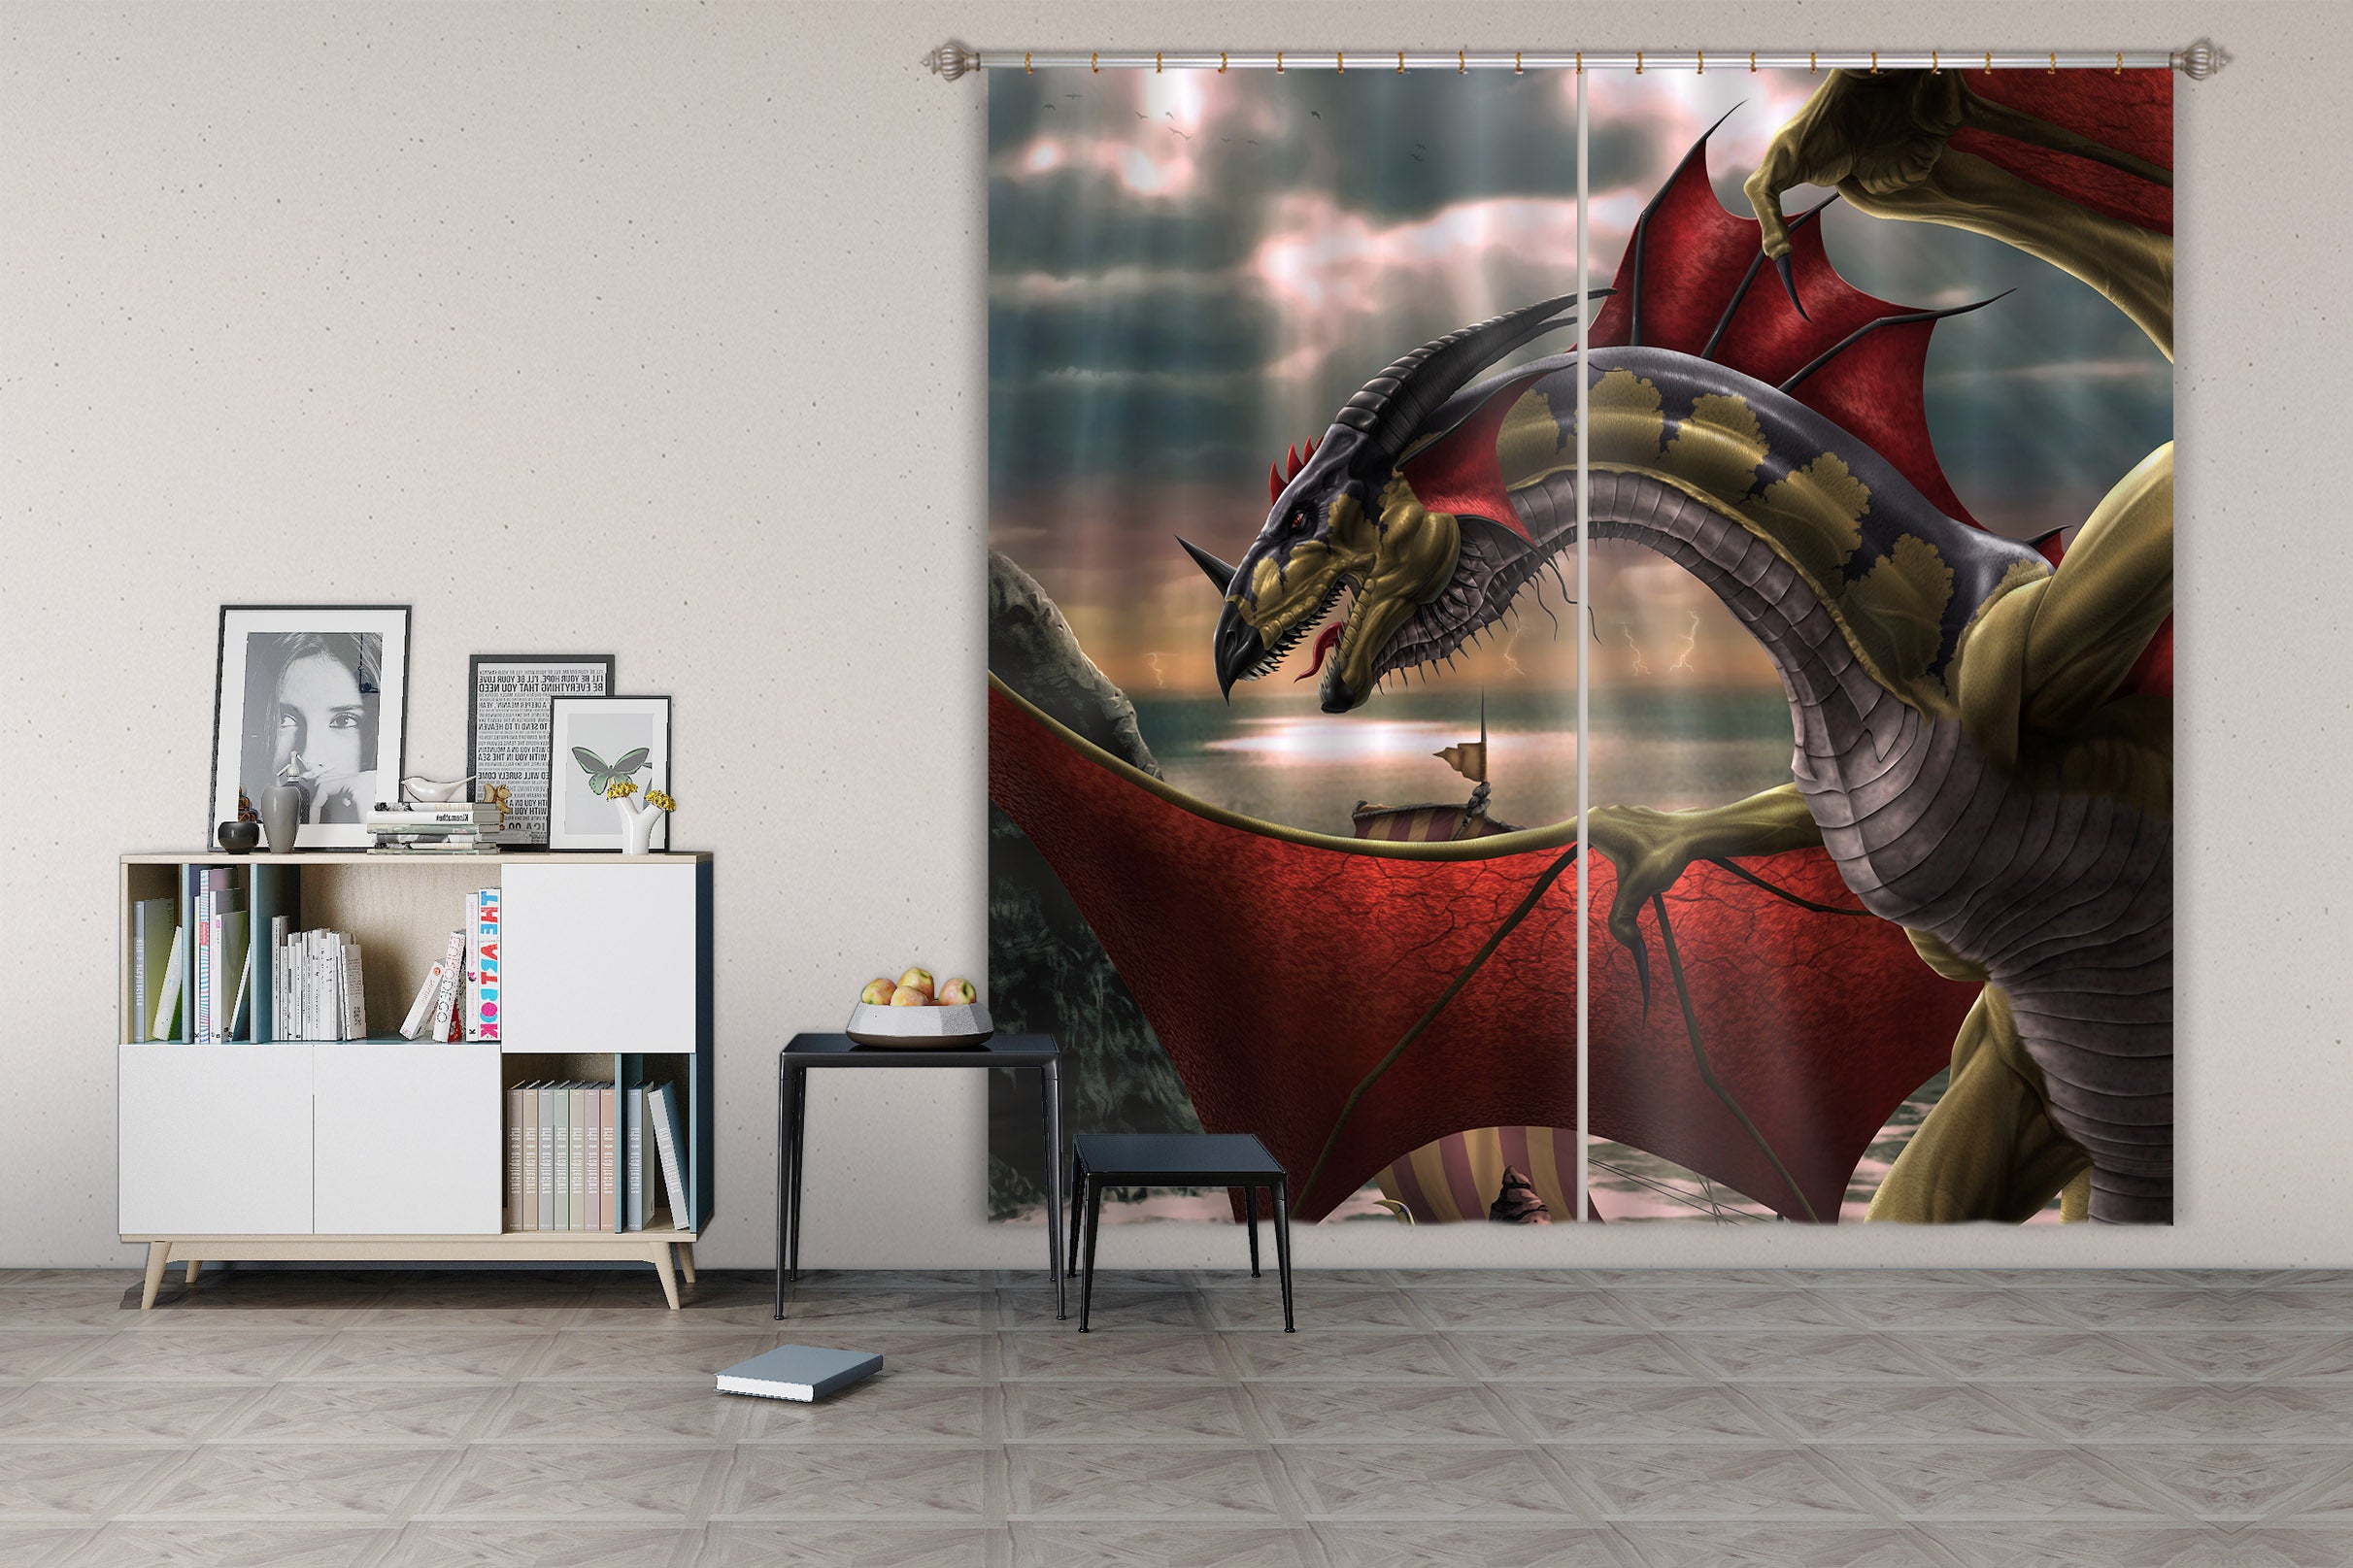 3D Dragon Wings 5064 Tom Wood Curtain Curtains Drapes